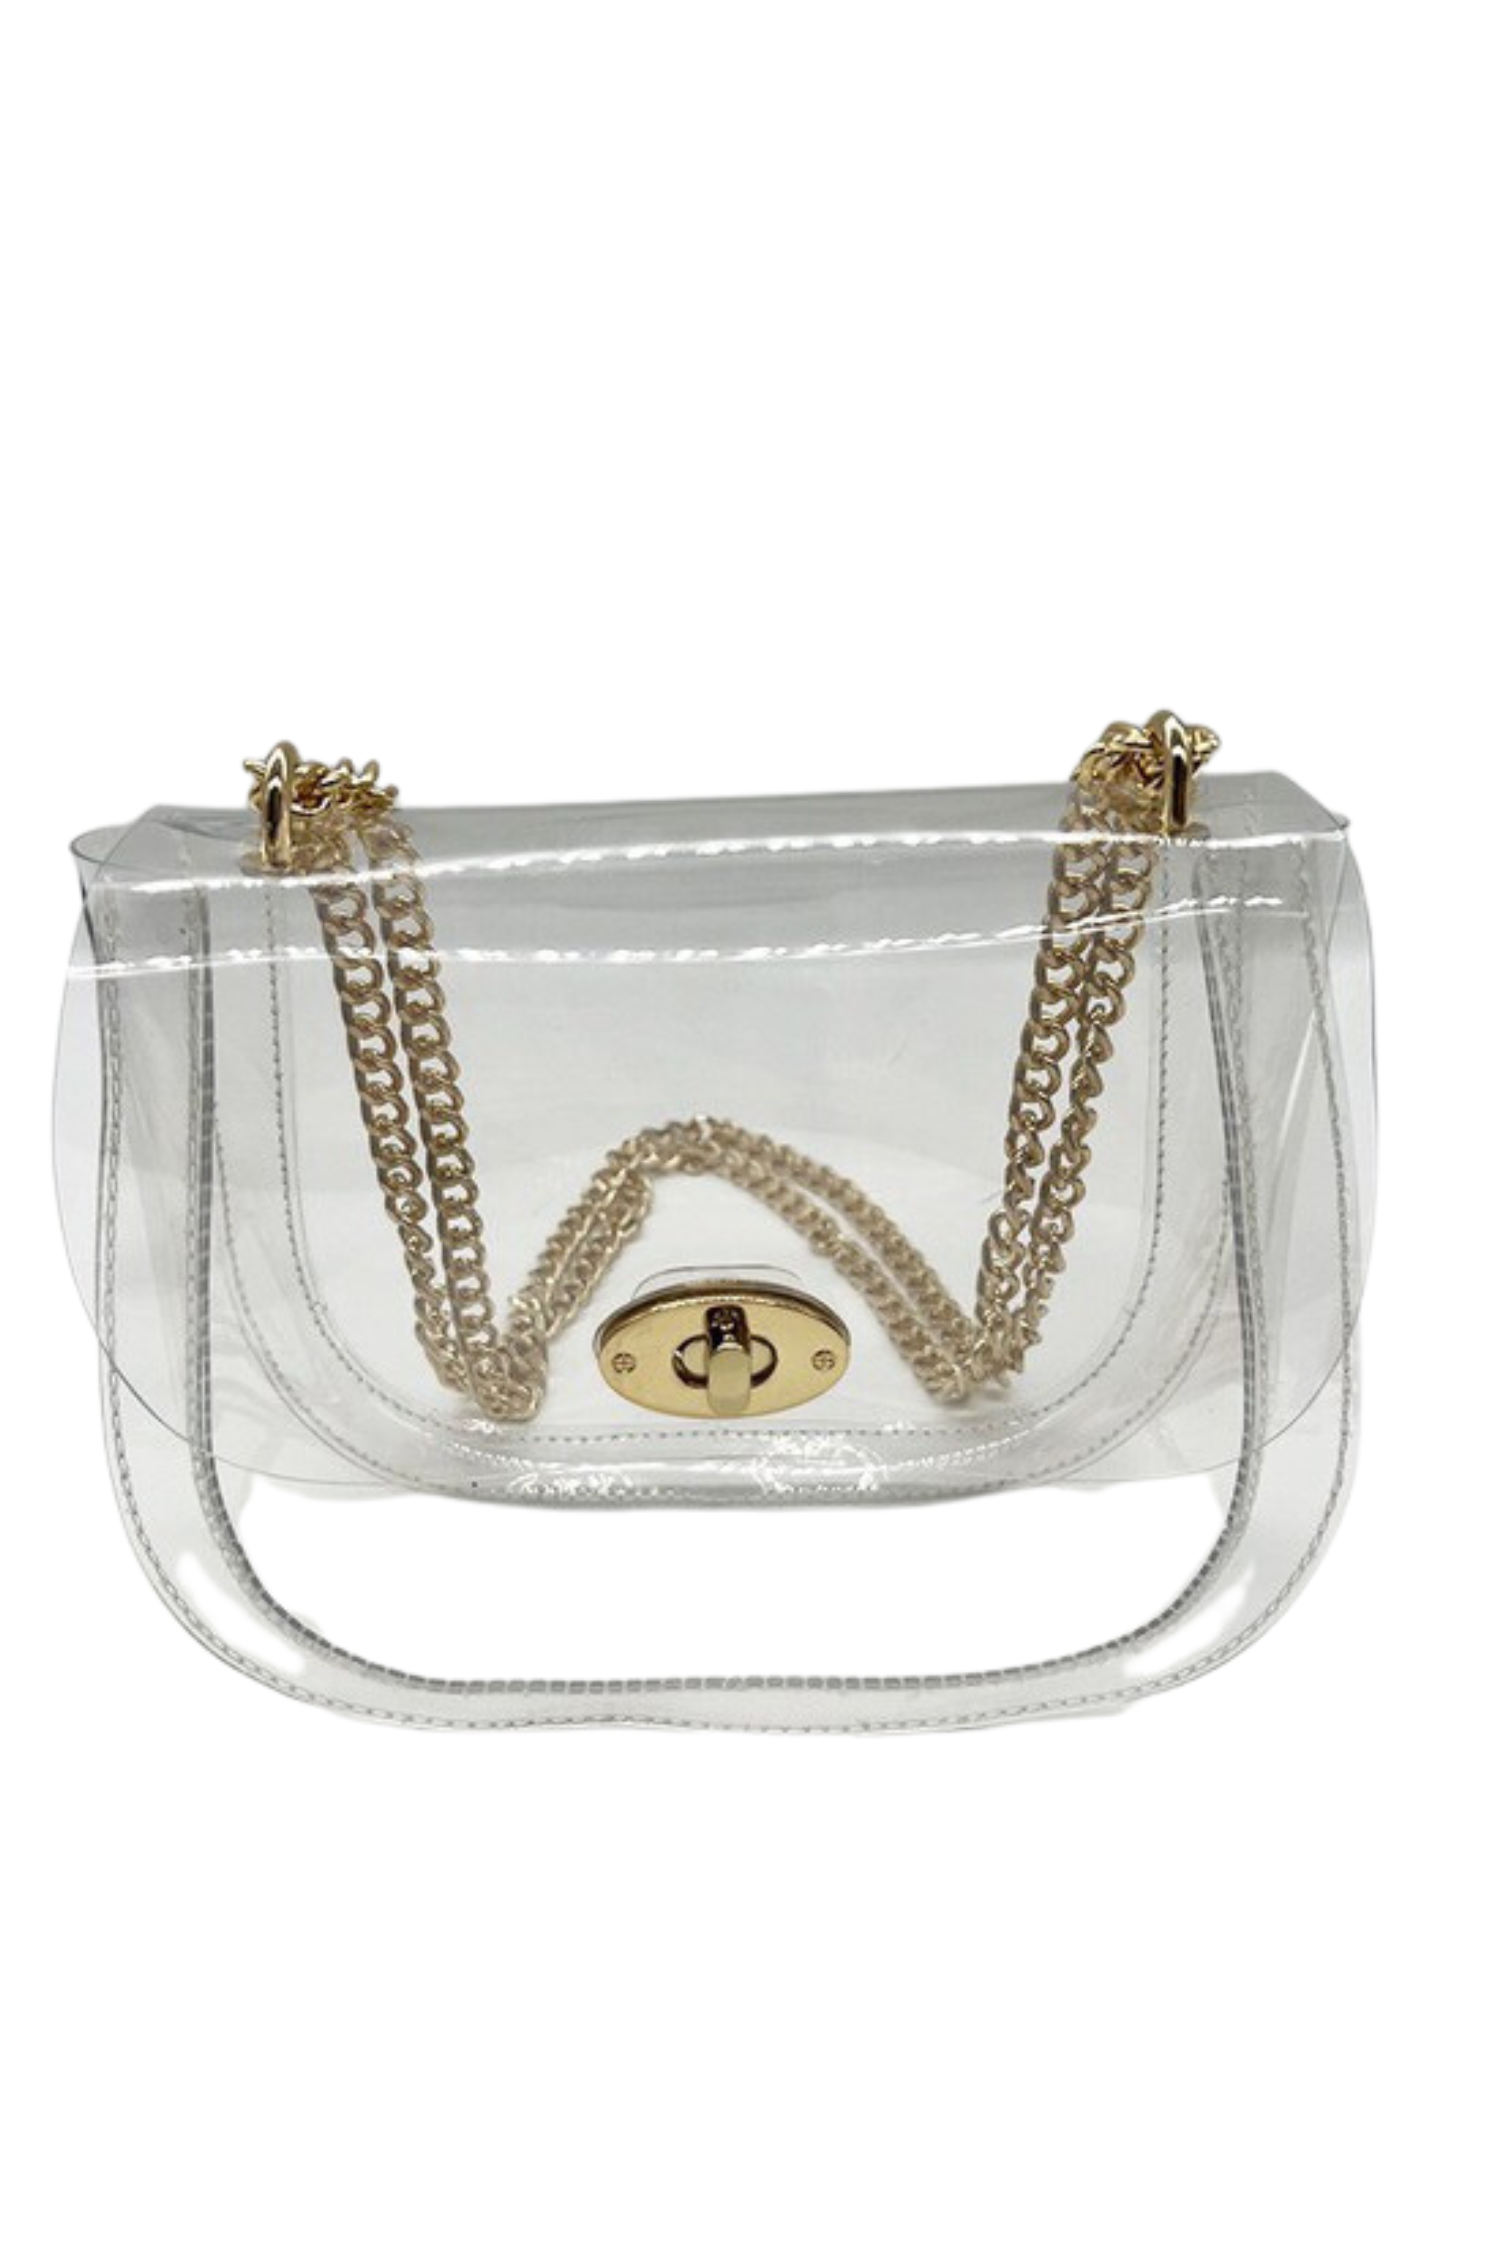 Sienna Vegan Crossbody Bag- with matching 2 straps and silver